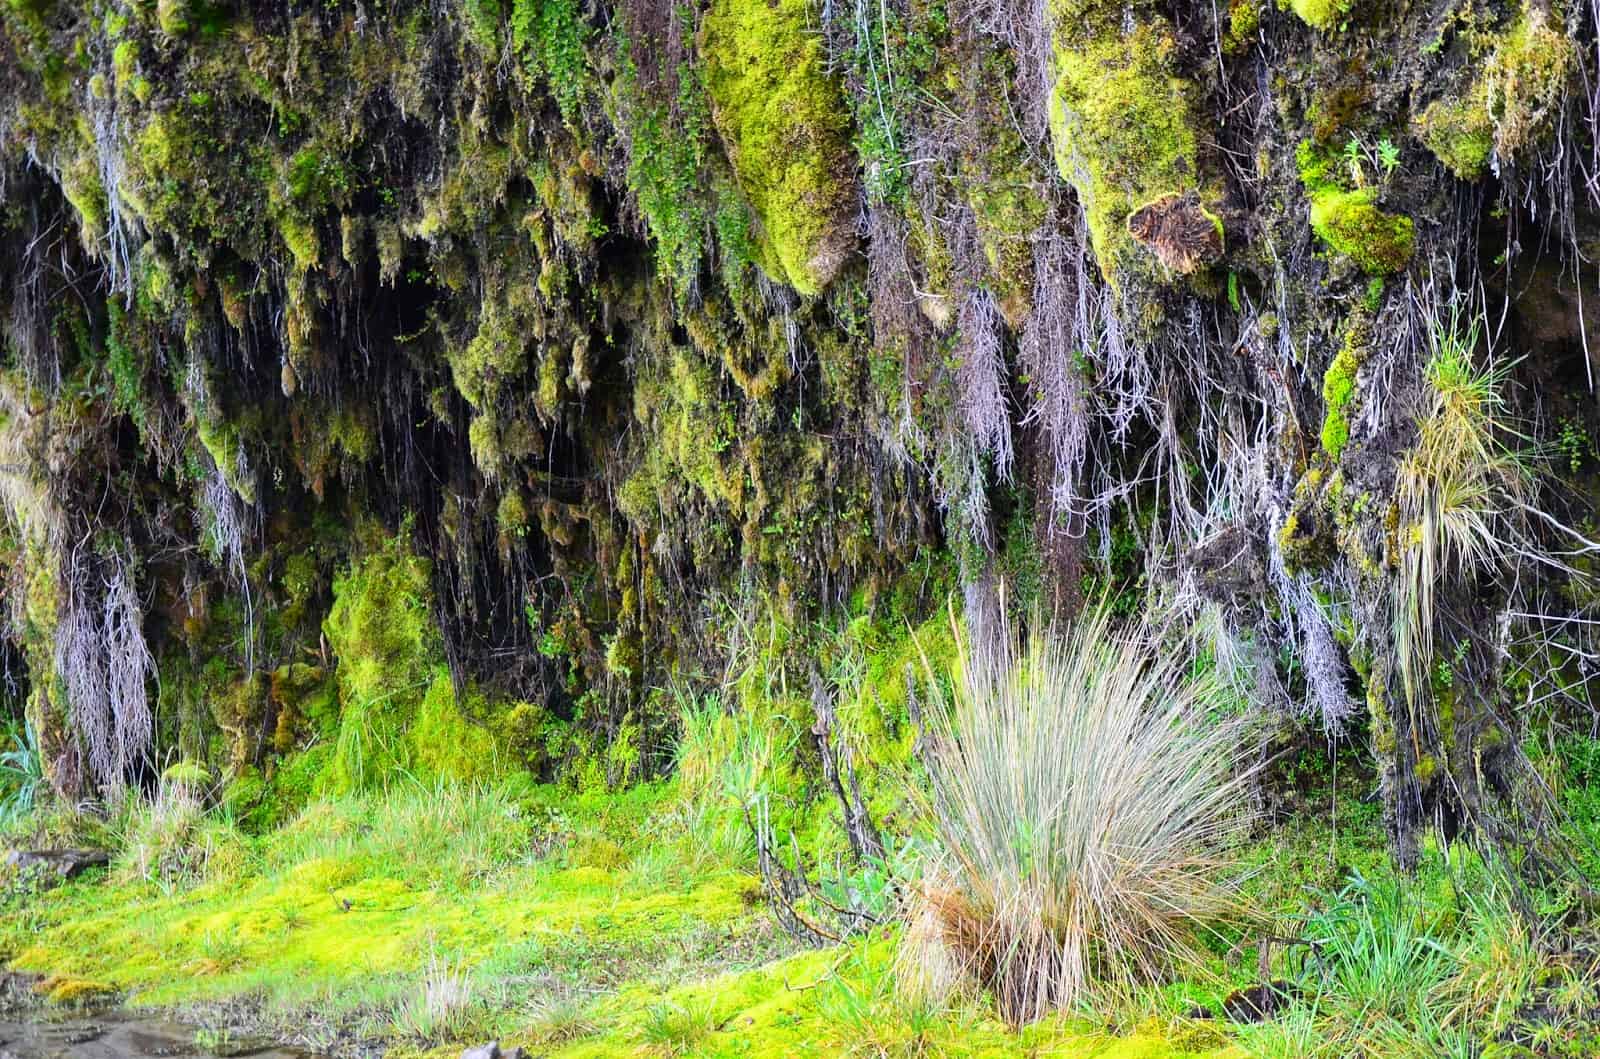 Vegetation at Aguacerales at Los Nevados National Park in Colombia